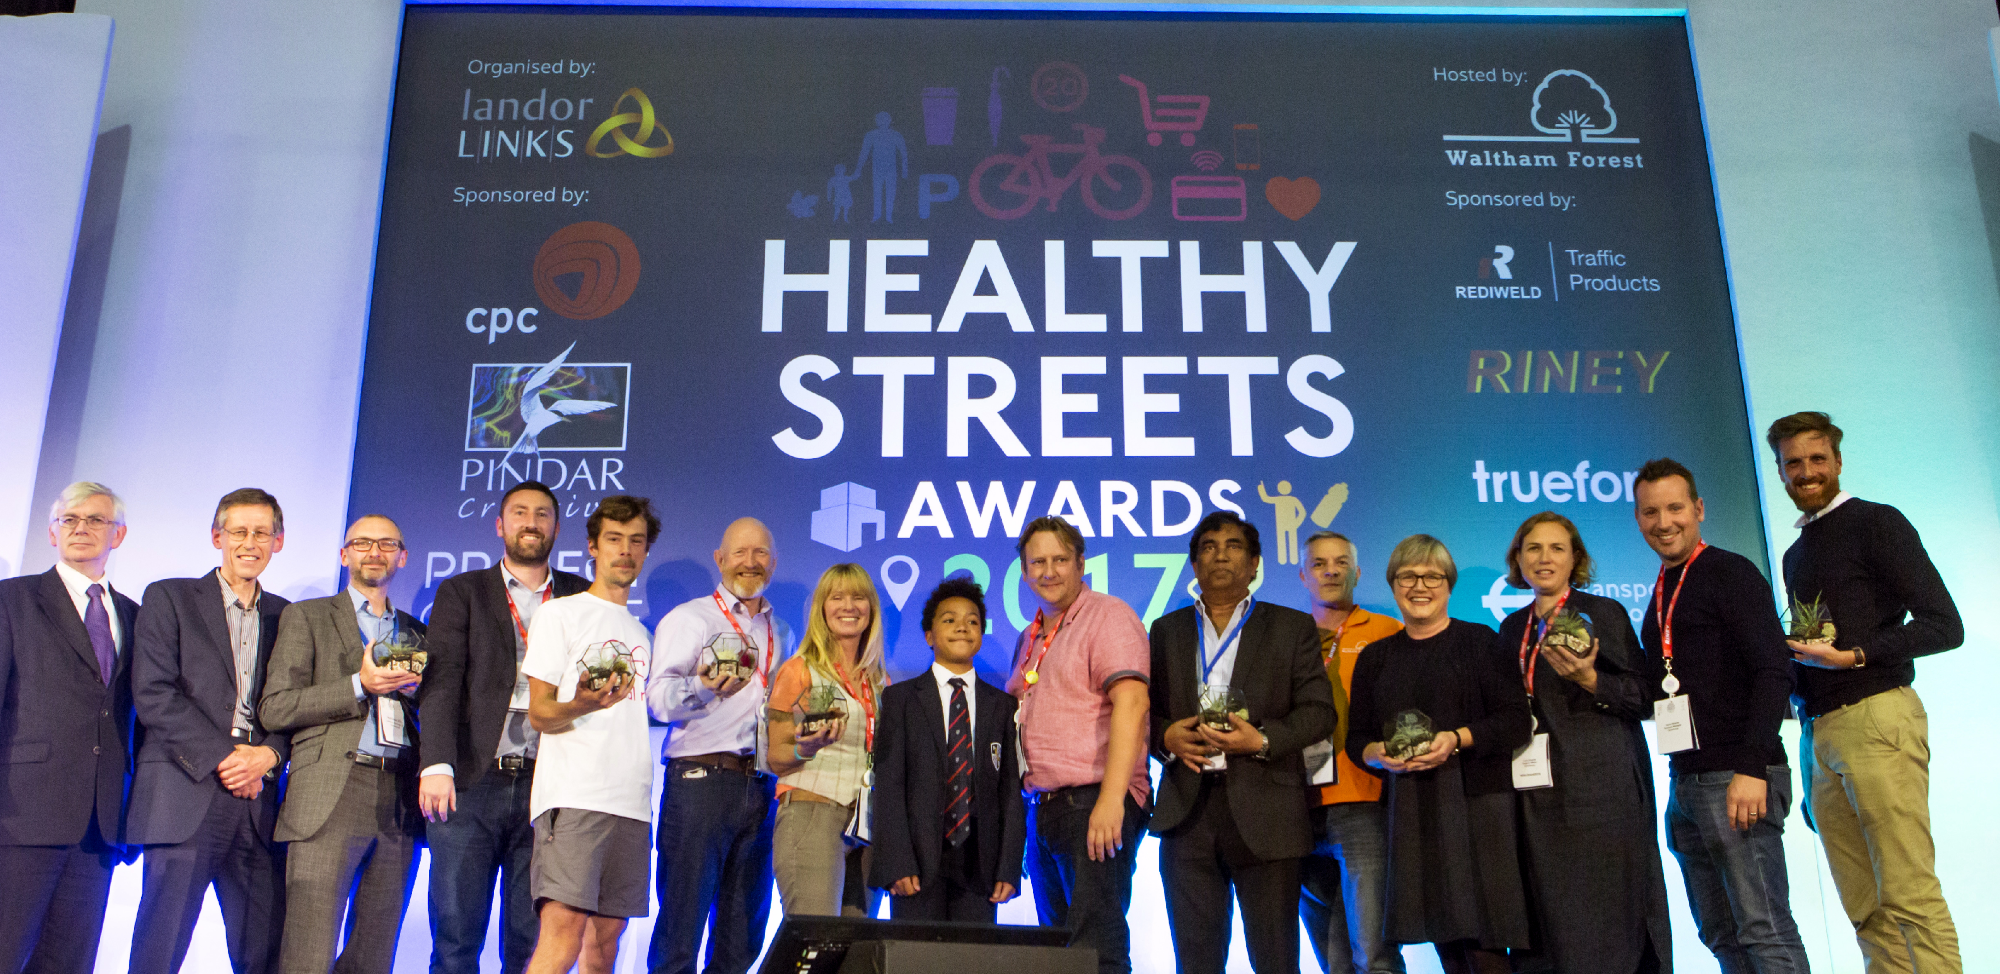 WInners of the Healthy Streets Awards 2017